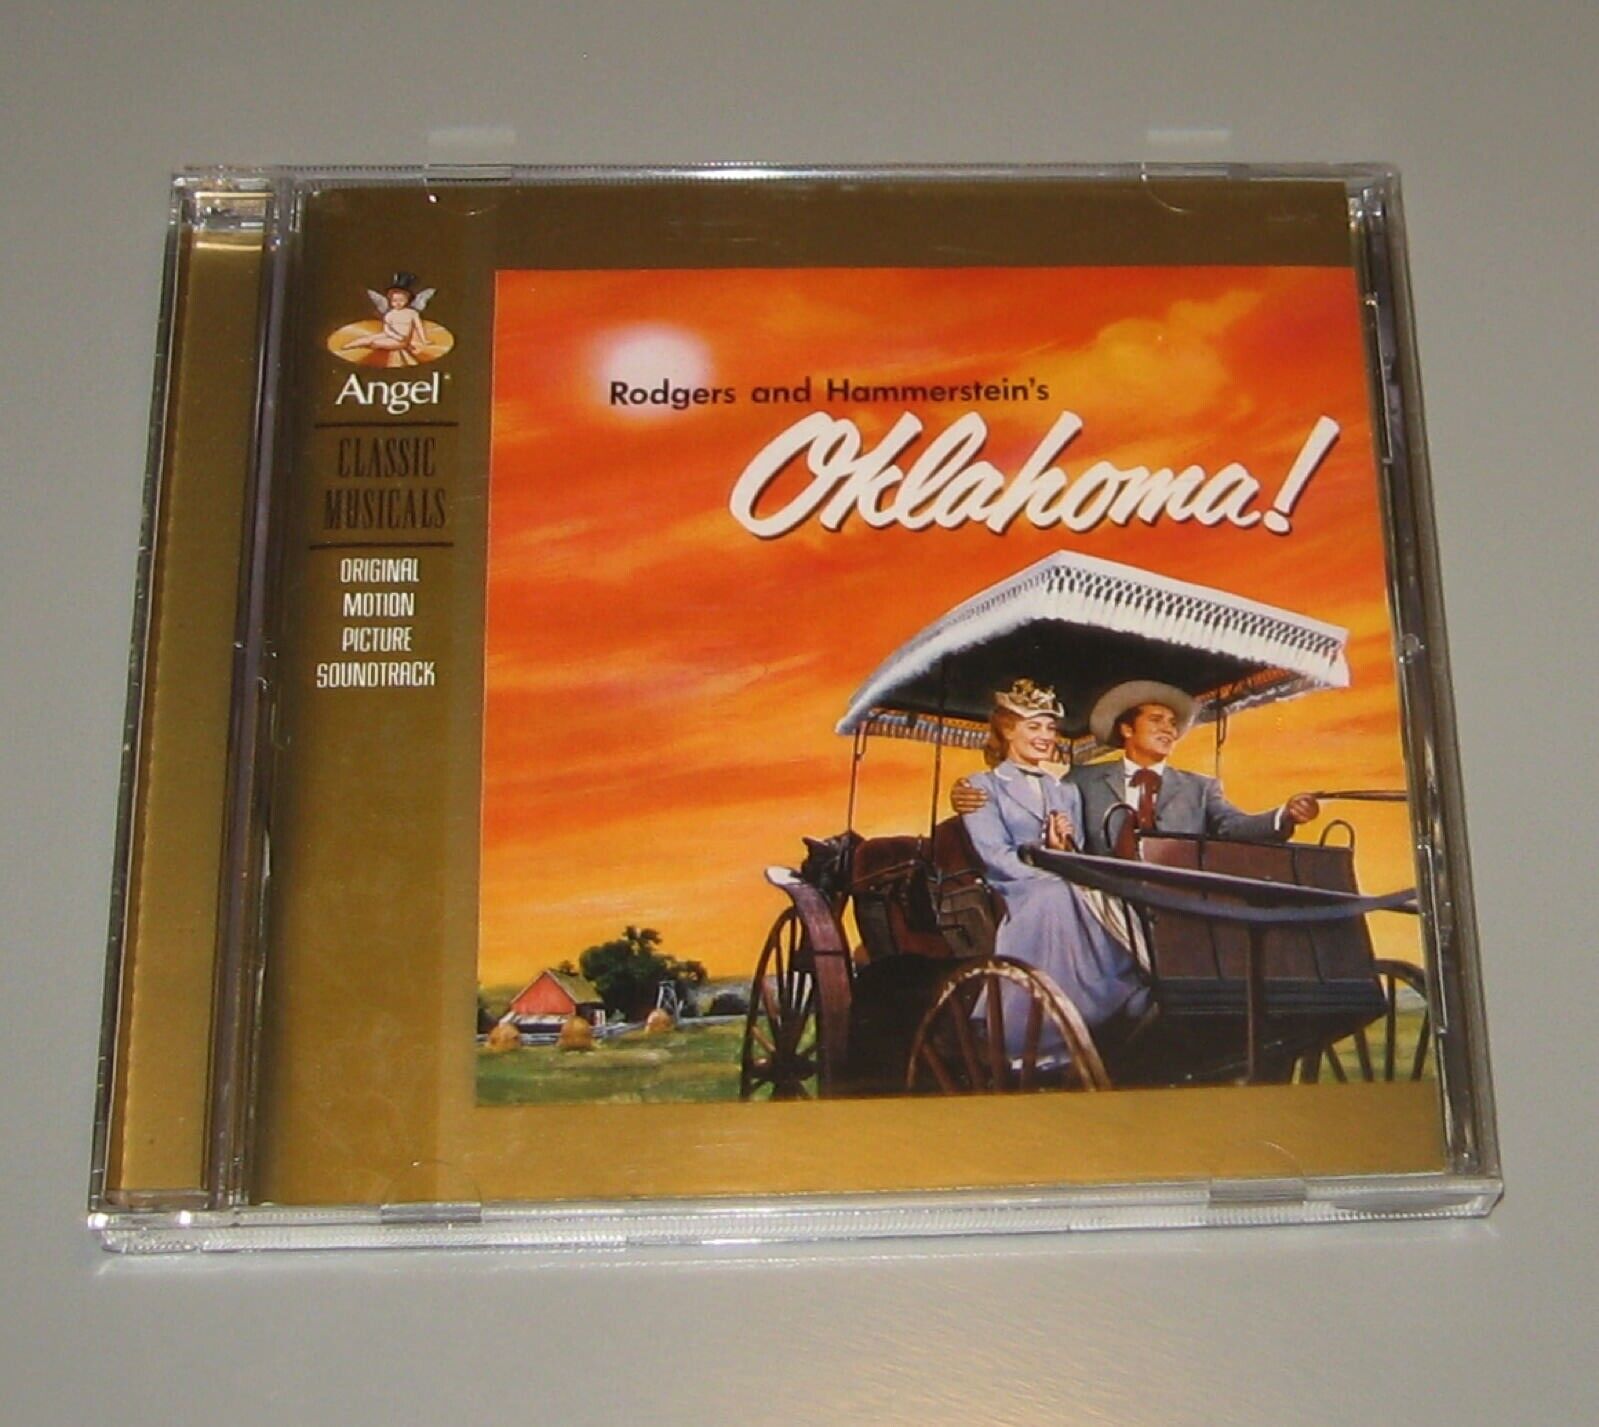 Oklahoma Original Motion Picture Soundtrack (CD, 2001, Angel Records)